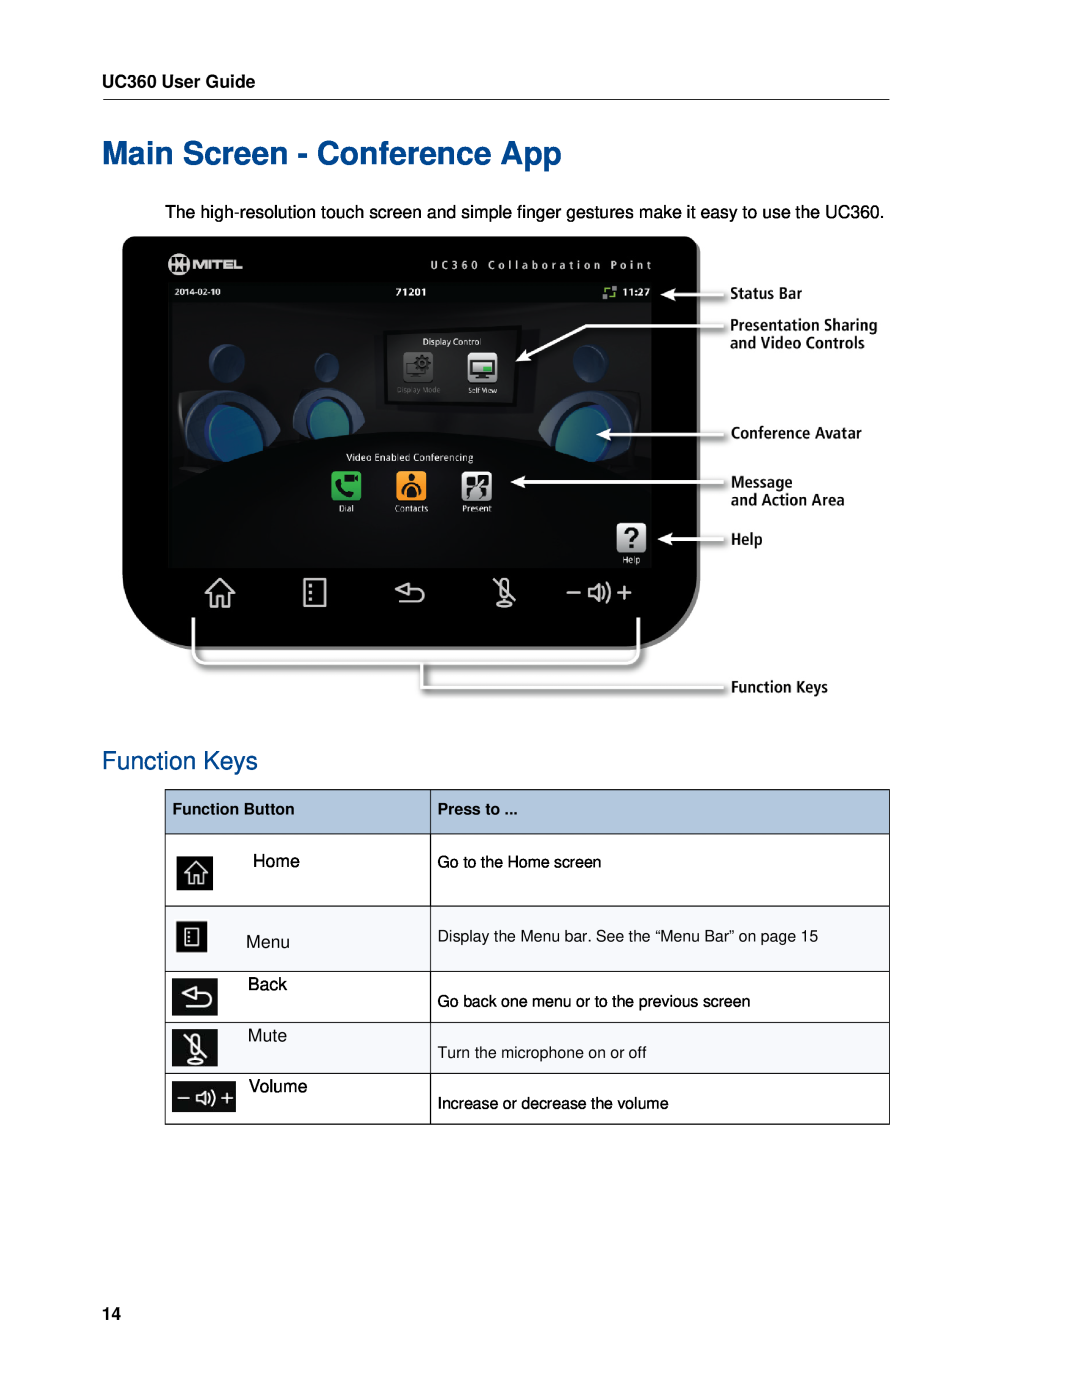 Mitel UC360 manual Main Screen - Conference App, Function Keys, Function Button, Press to 